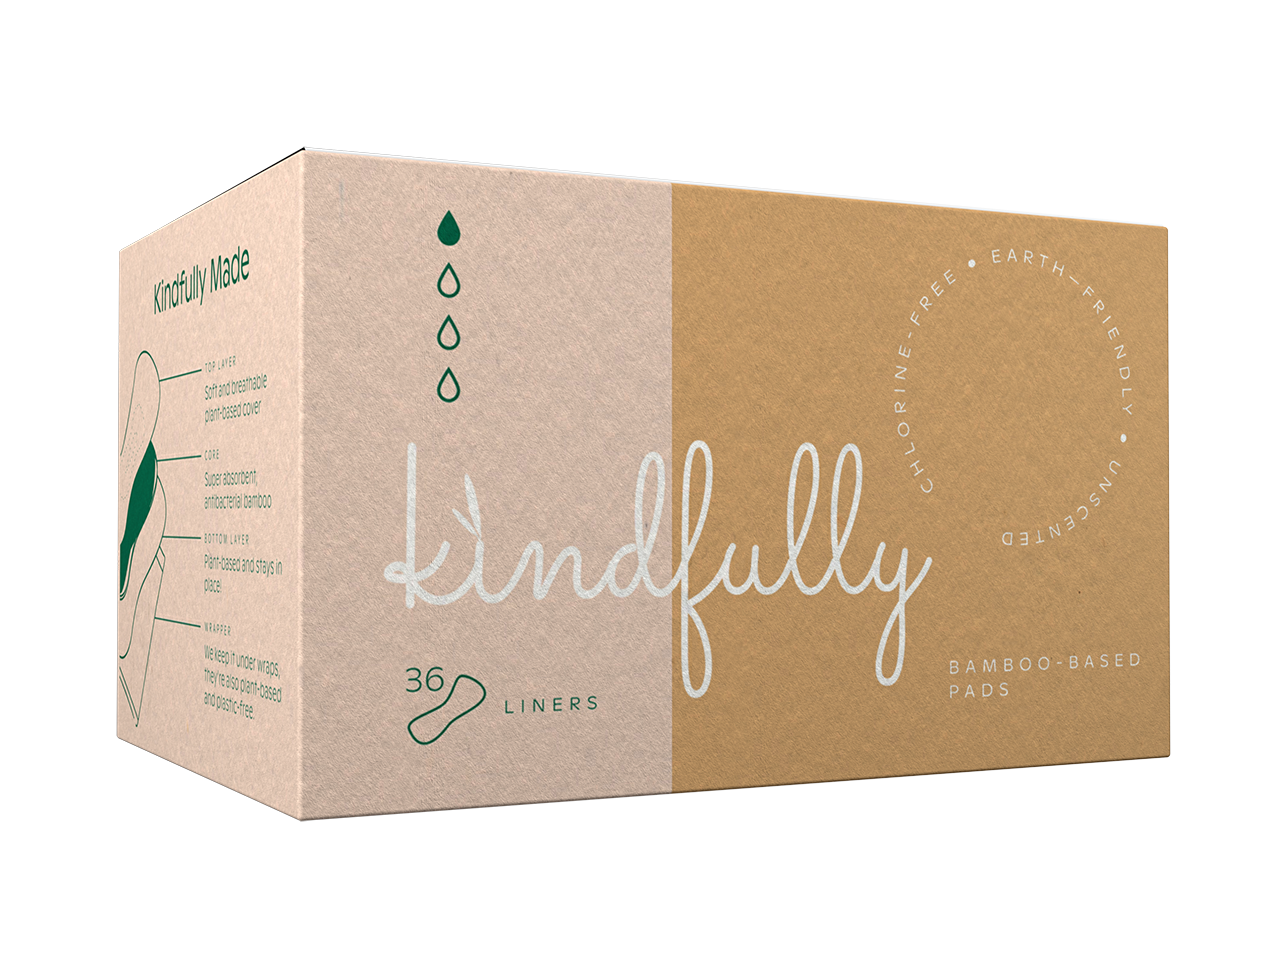 Kindfully Liners Sustainable Menstrual Pads